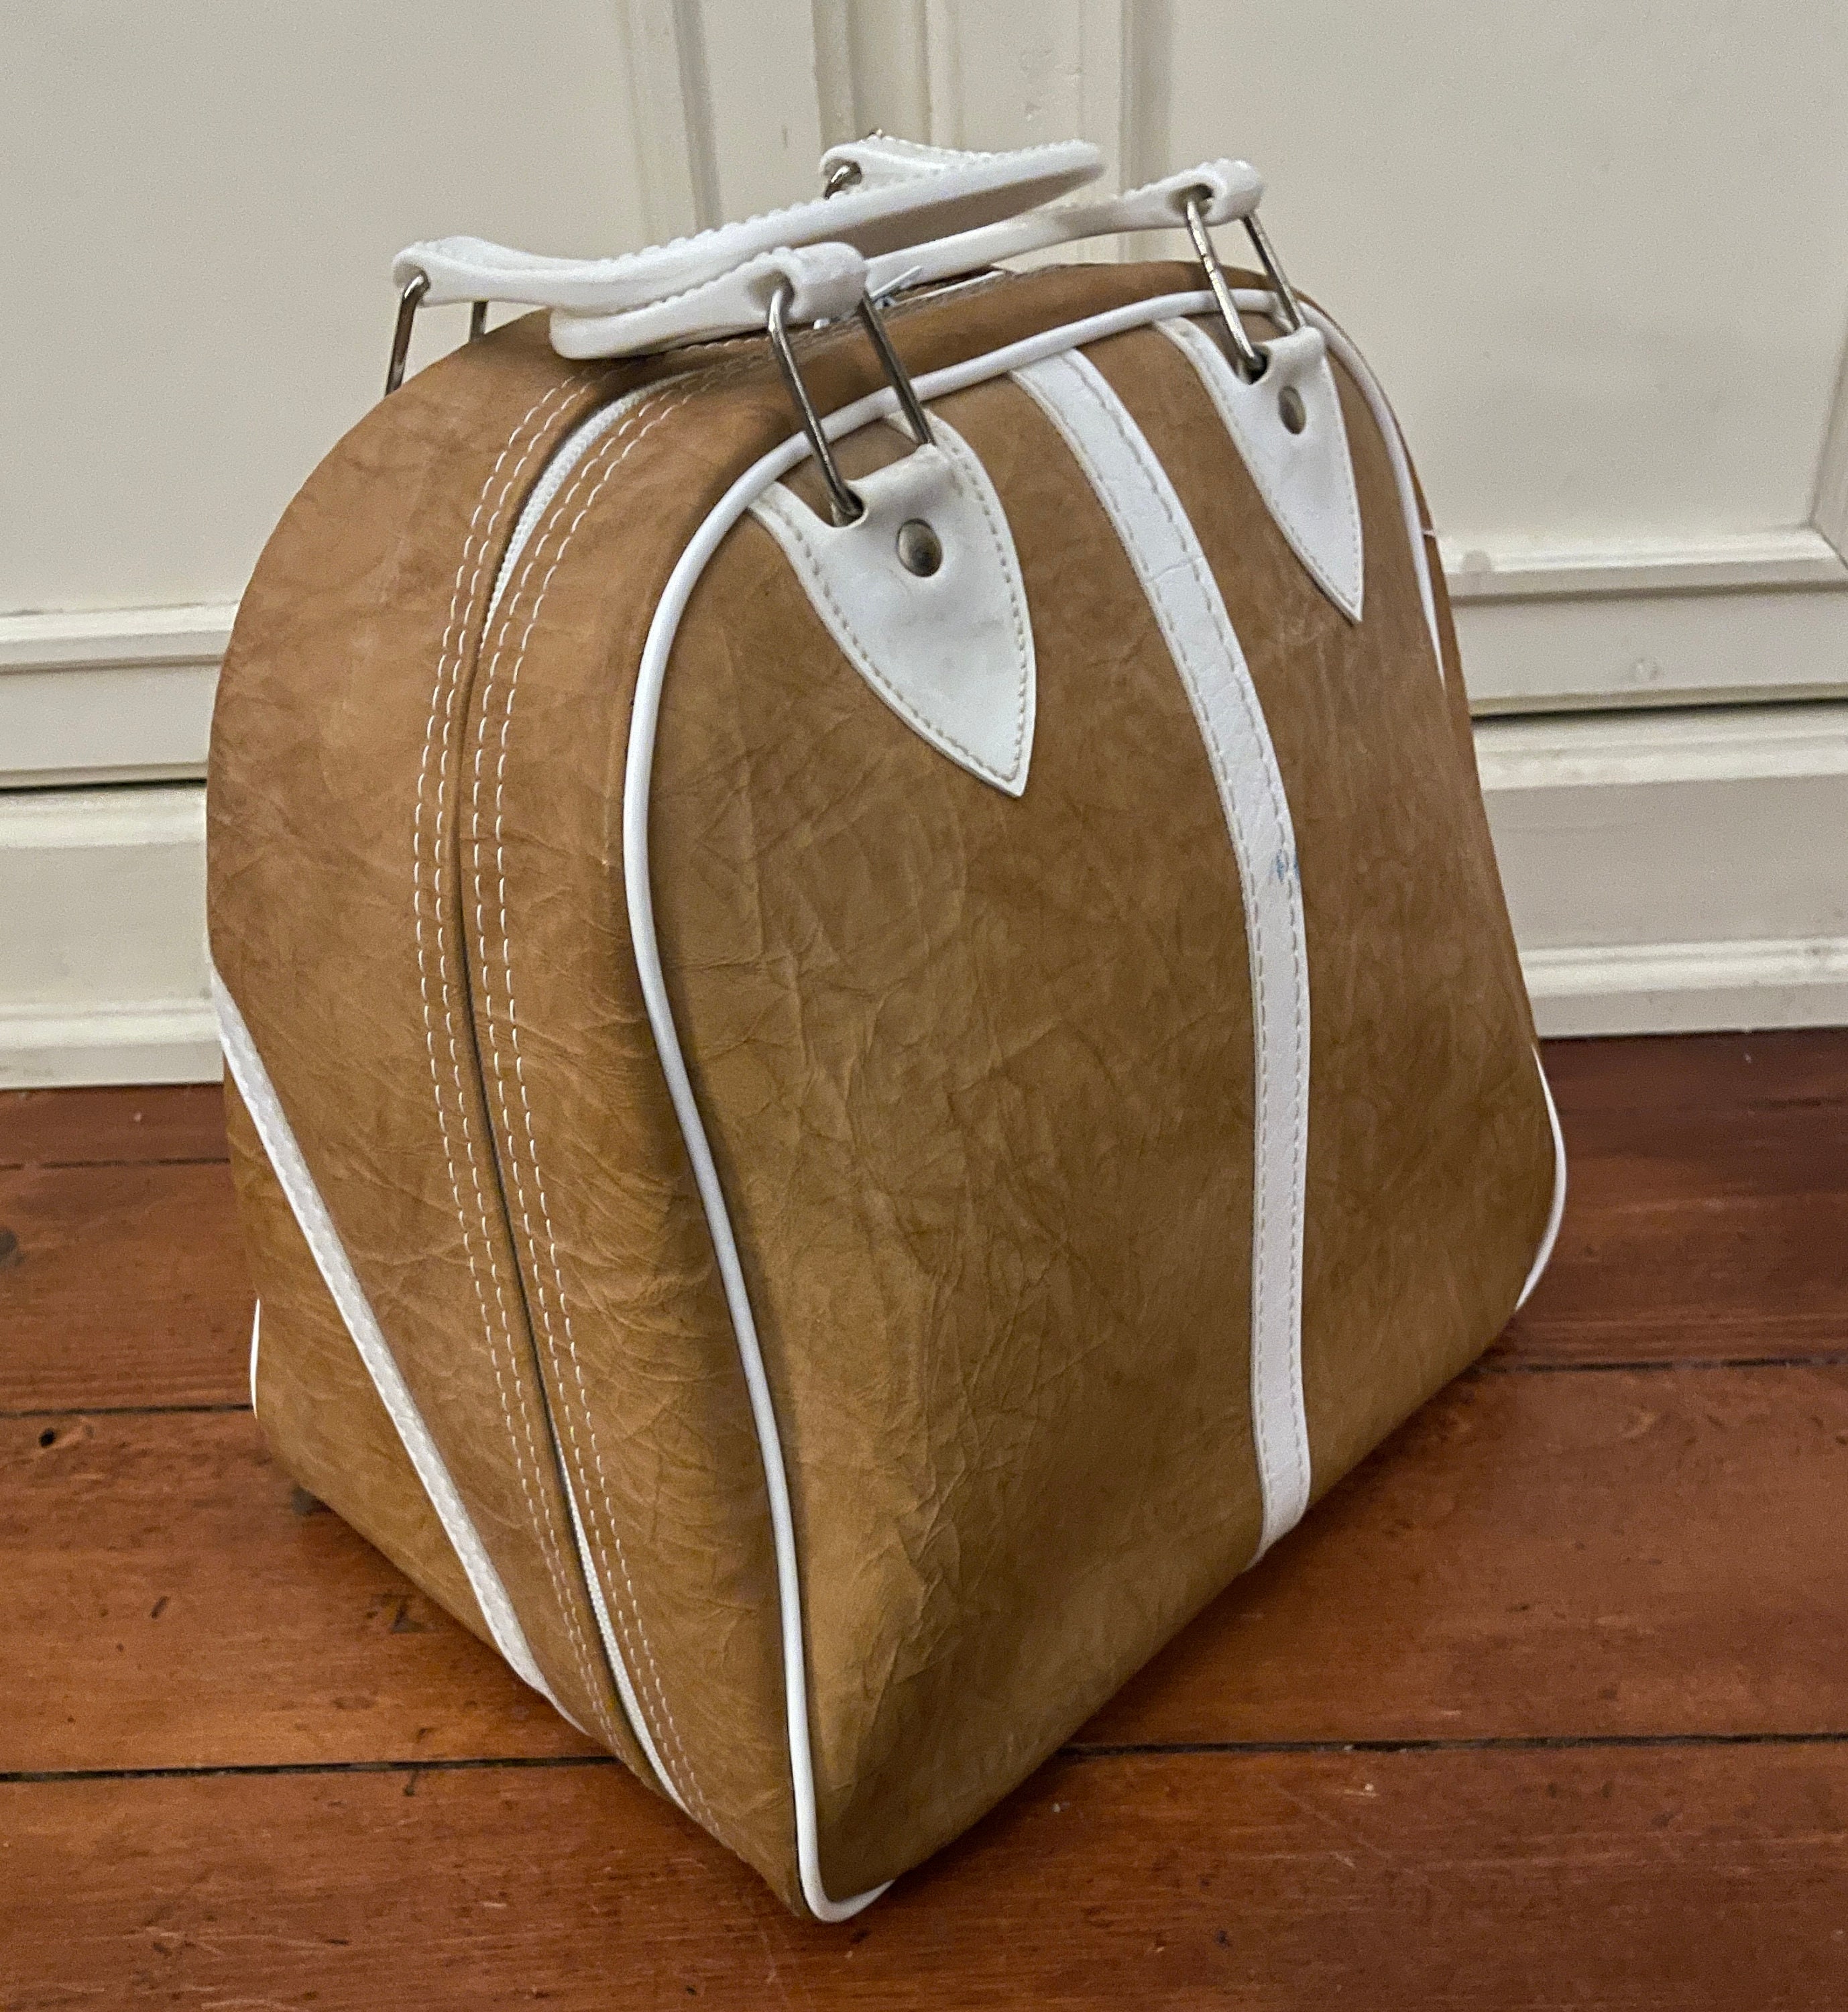 Vintage One Ball Bowling Bag Brown and White